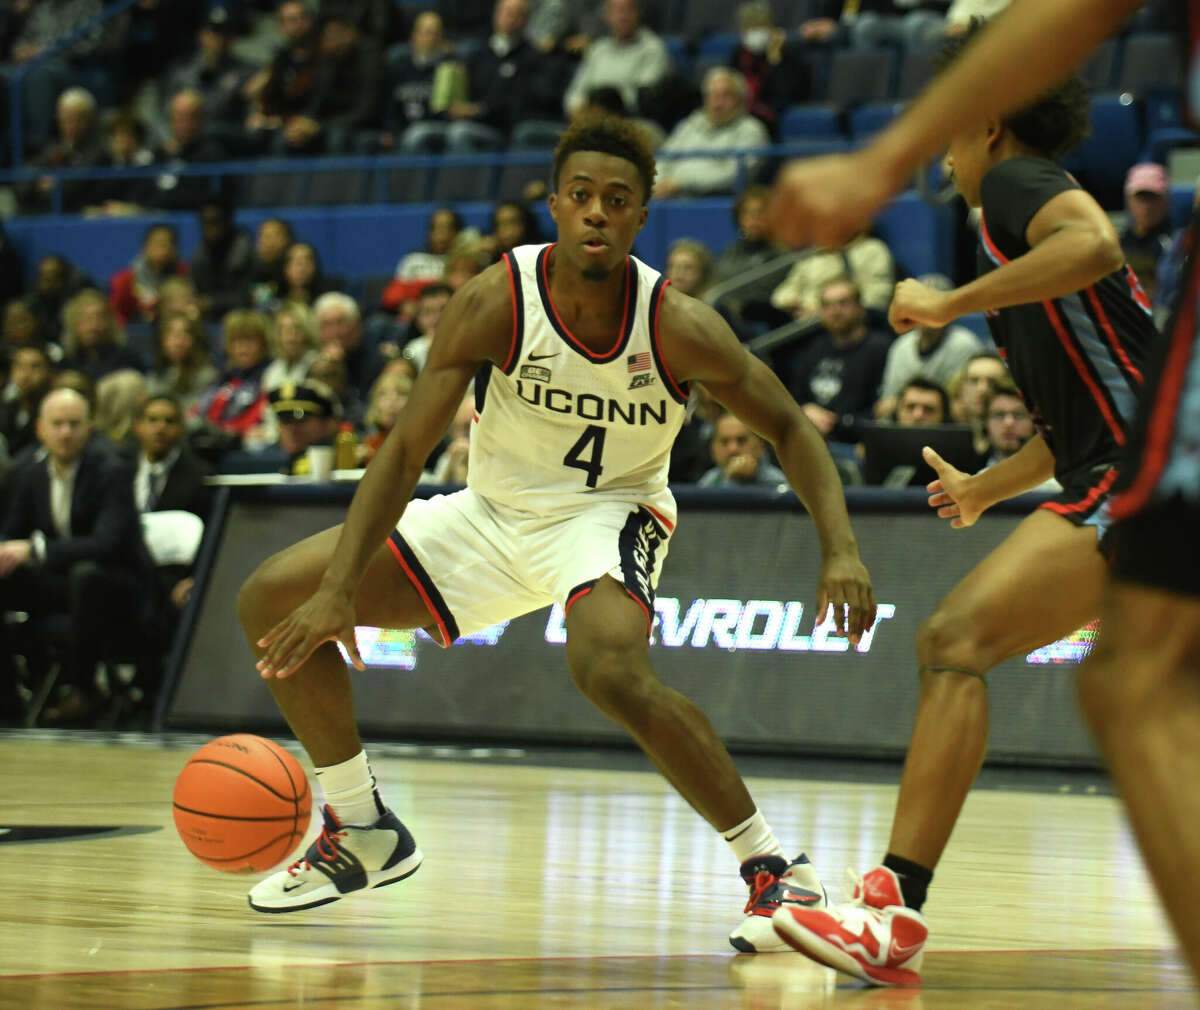 UConn guard Nahiem Alleyne (4) controls the ball in the NCAA men's college basketball game between No. 25 UConn and Delaware State at the XL Center in Hartford, Conn. Sunday, Nov. 20, 2022.